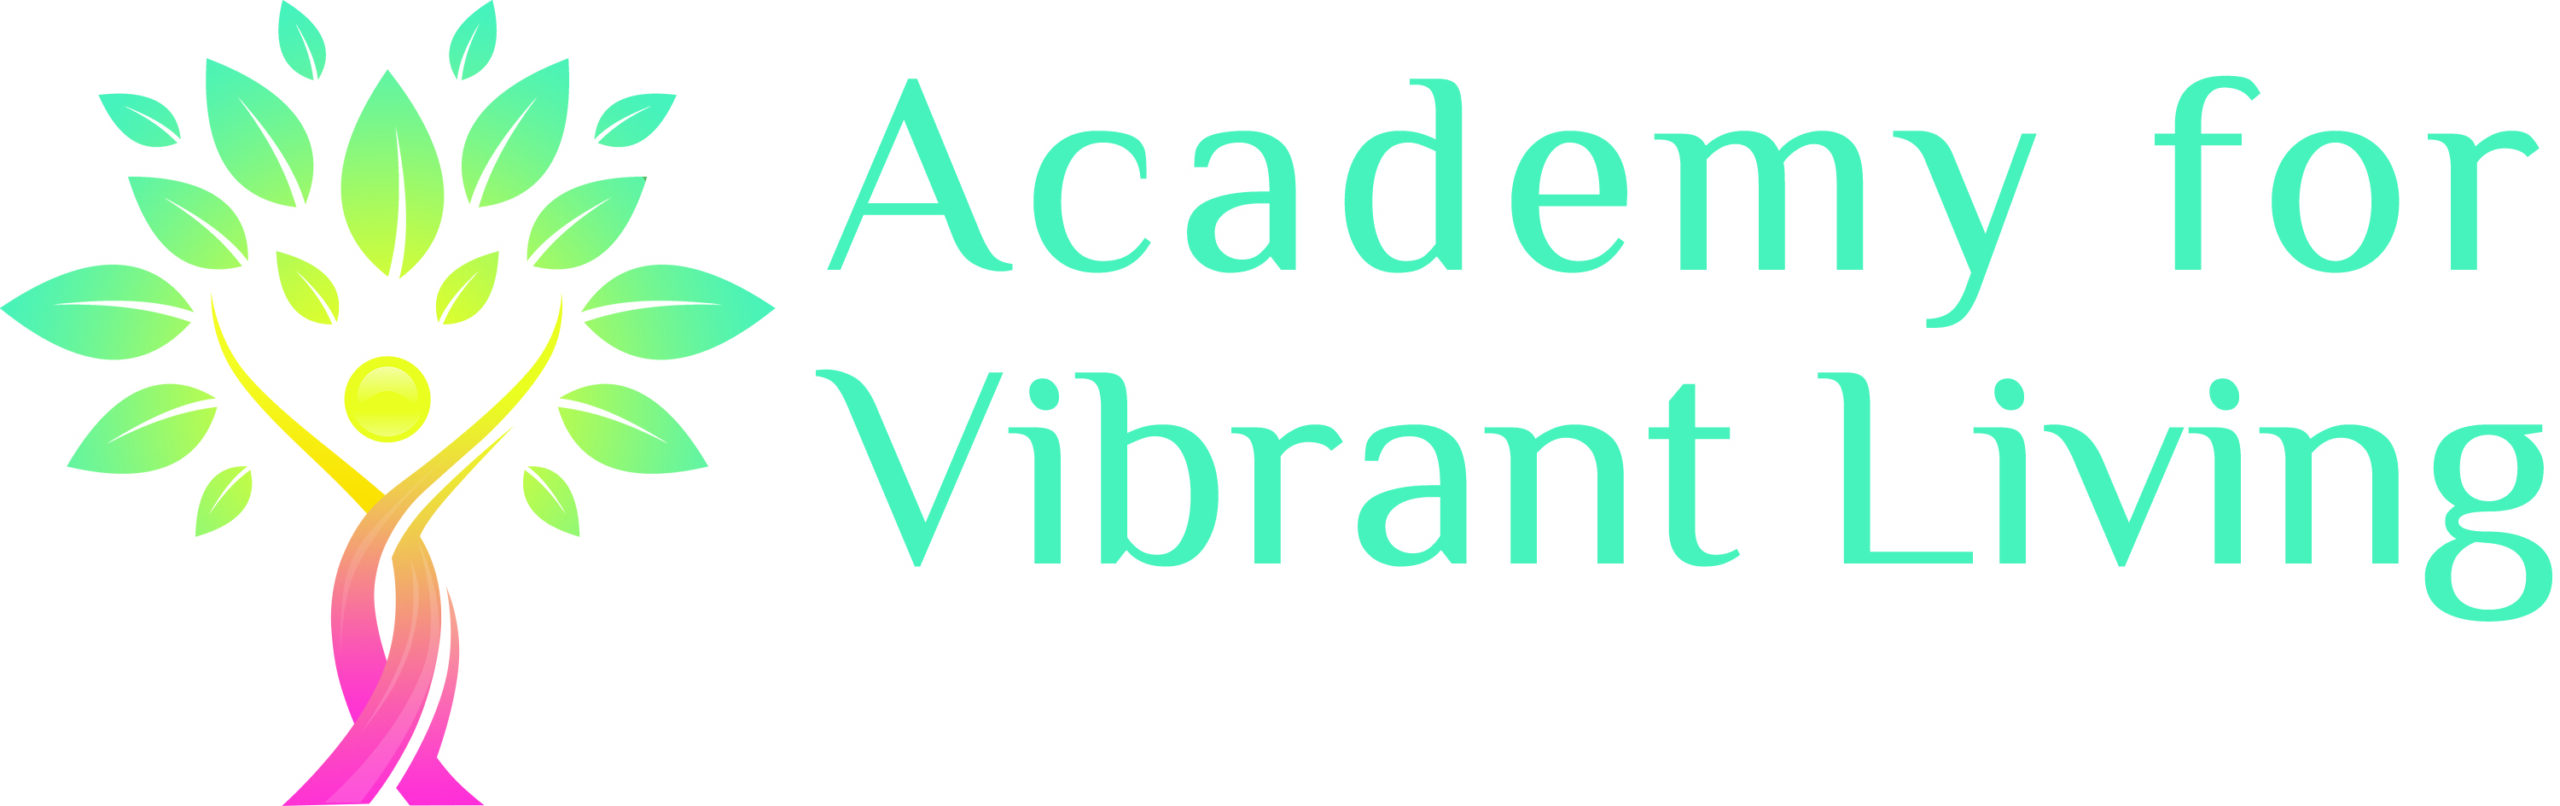 Academy for Vibrant Living